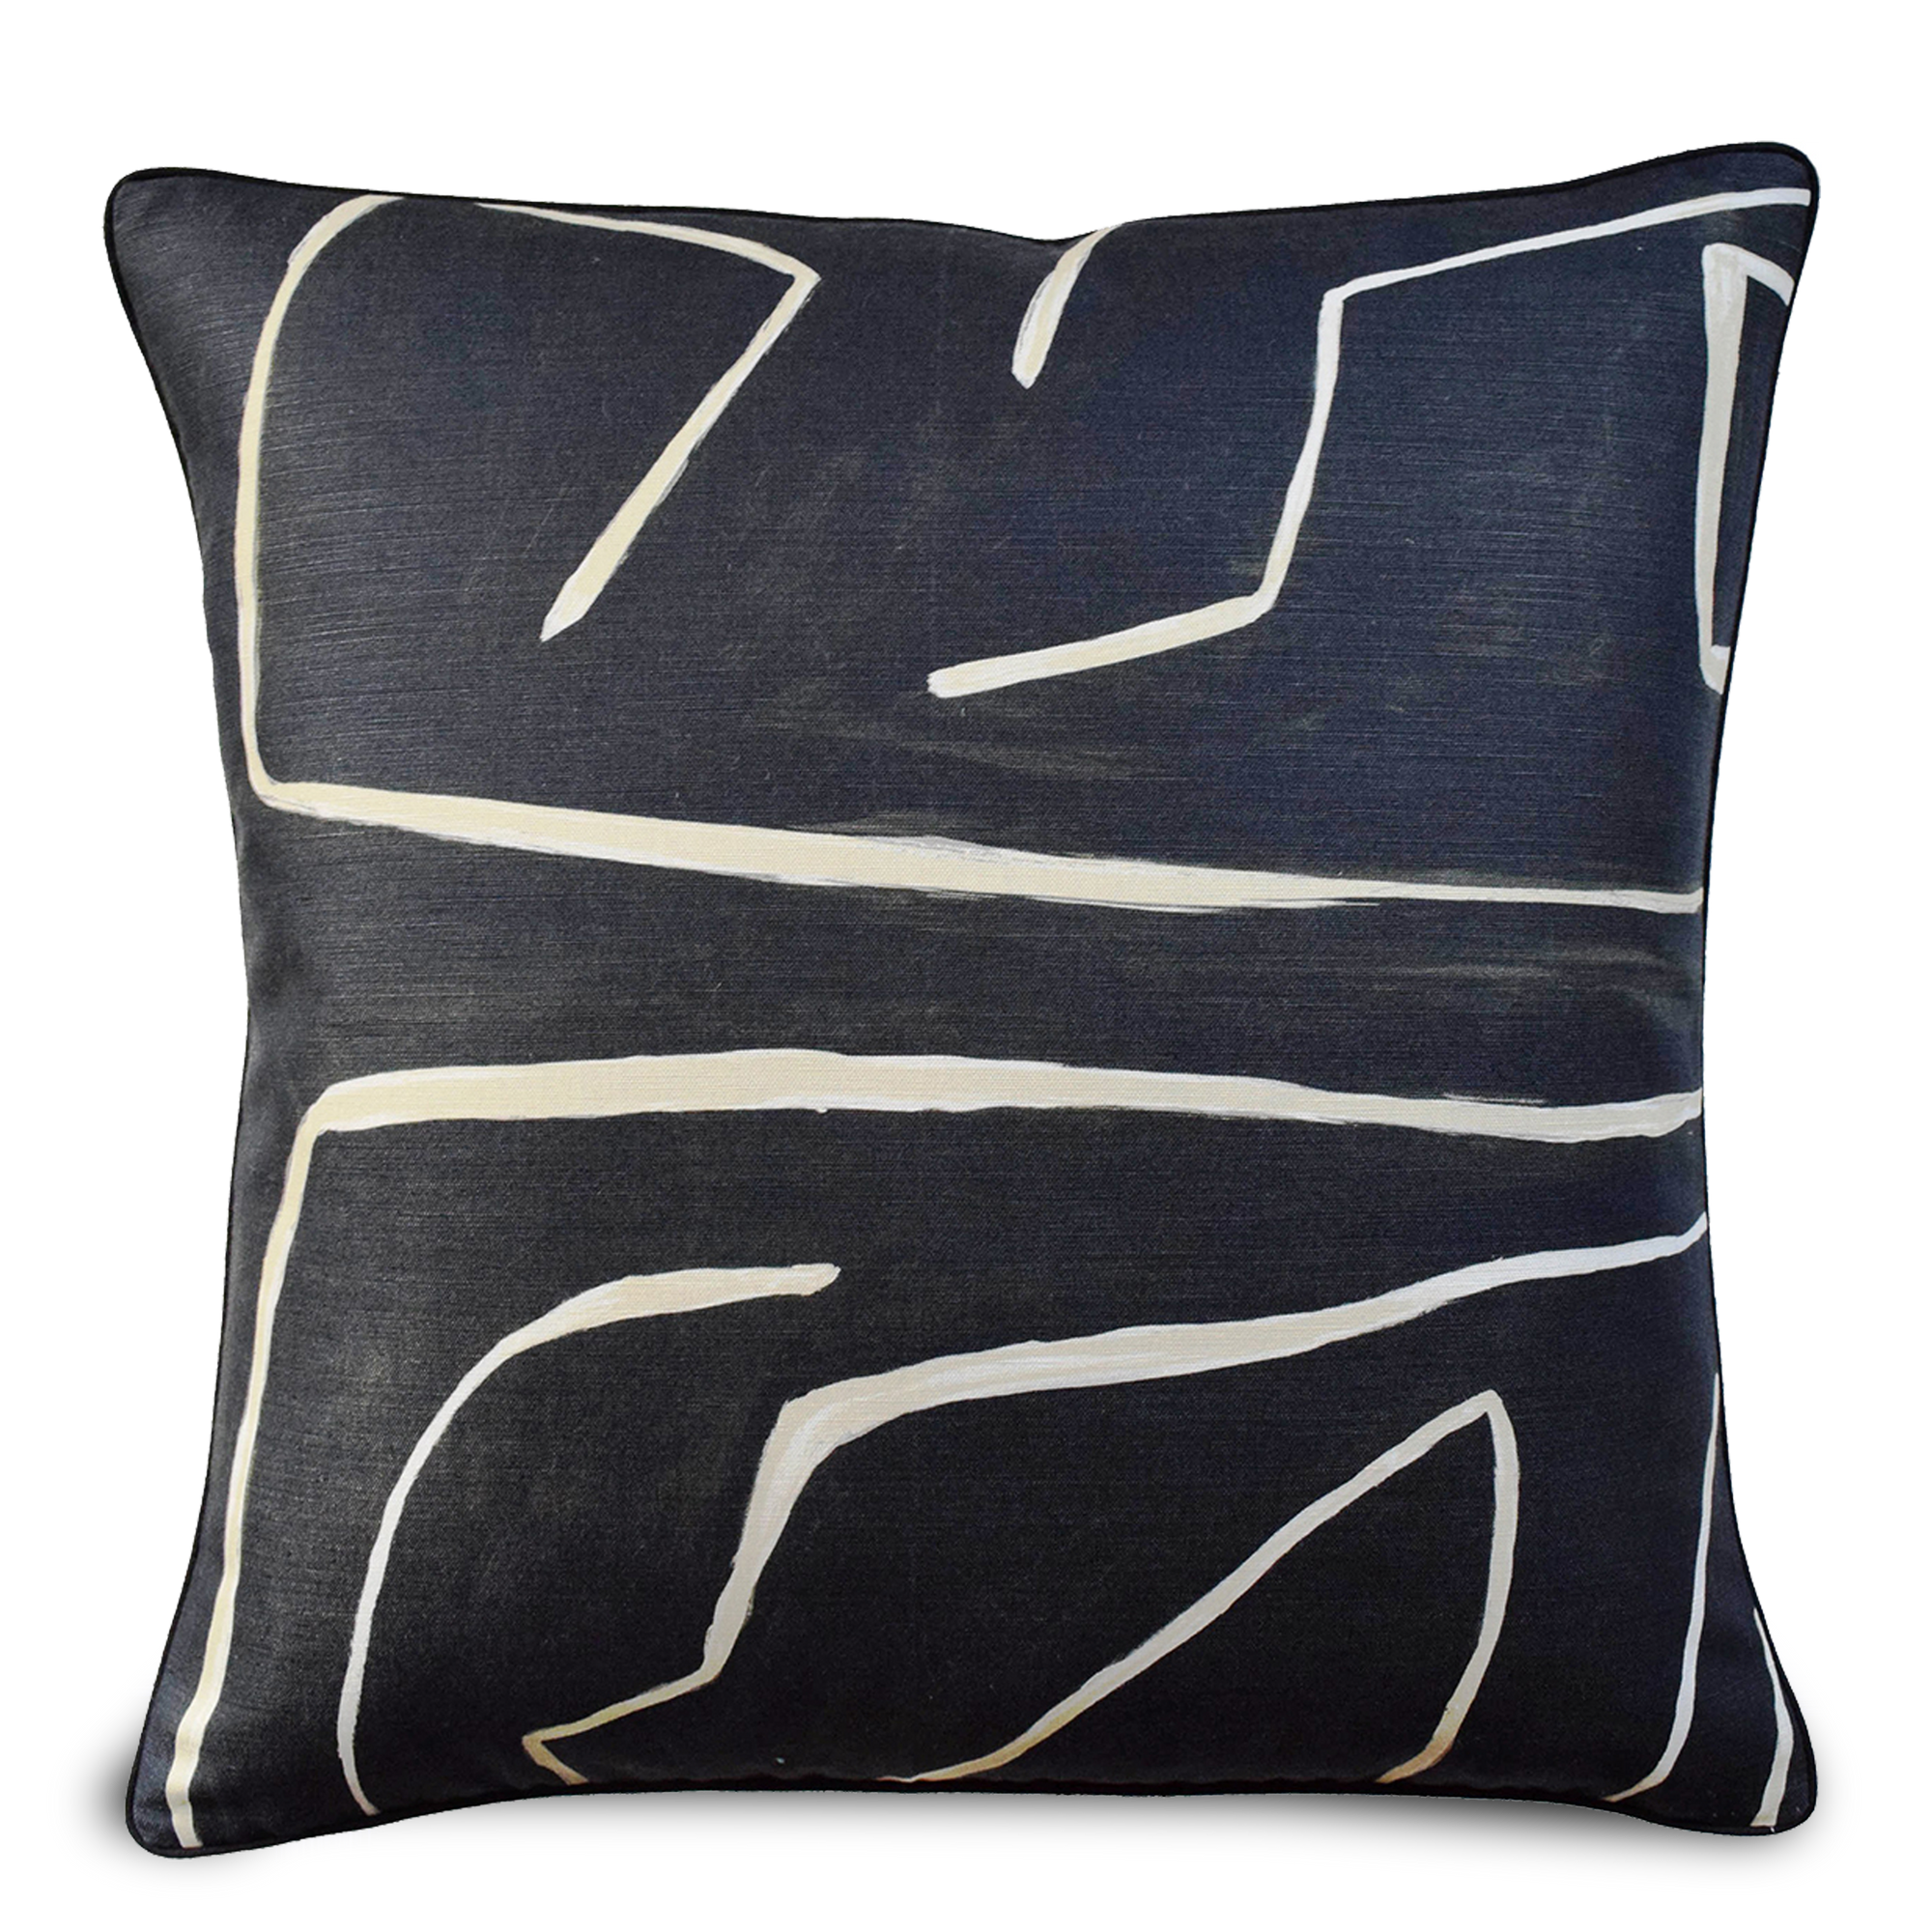 The Graffito Pillow features an abstract design and bold colour contrast.